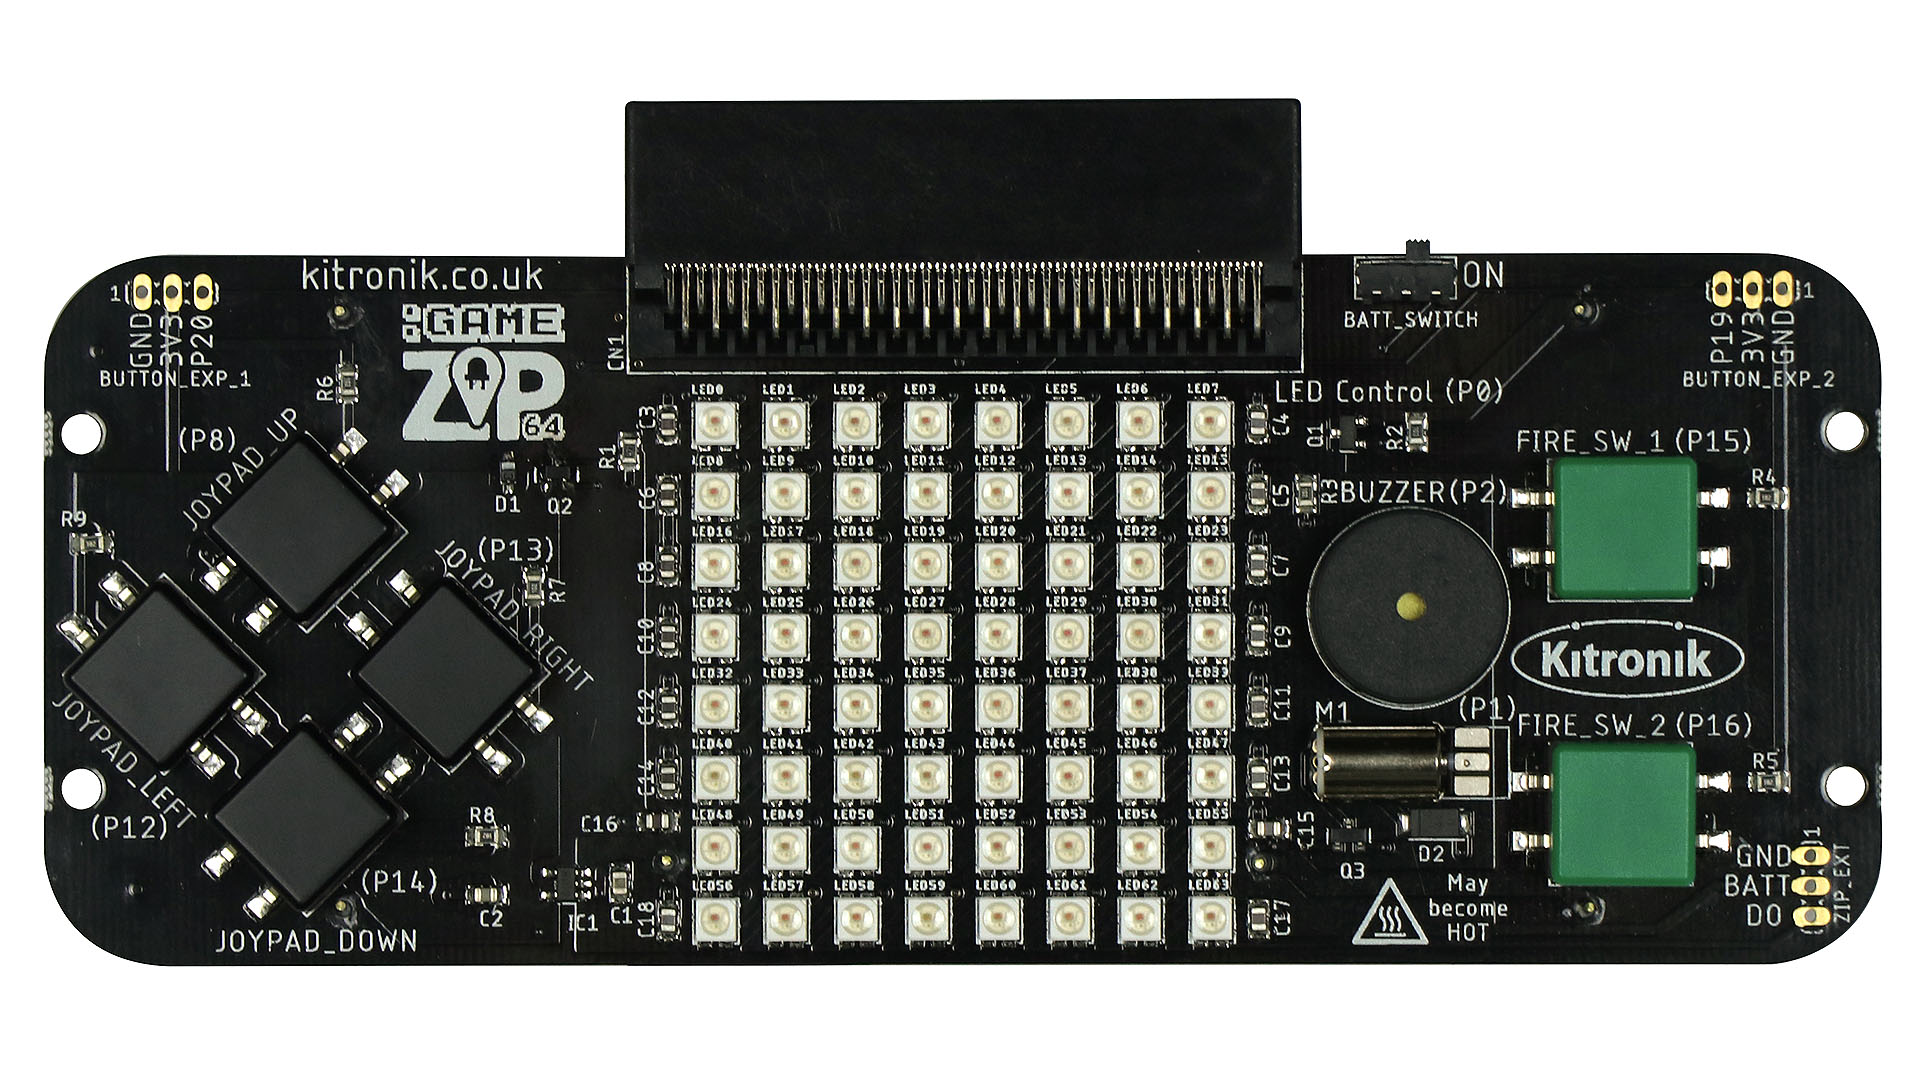 GAME ZIP 64 for the BBC micro:bit